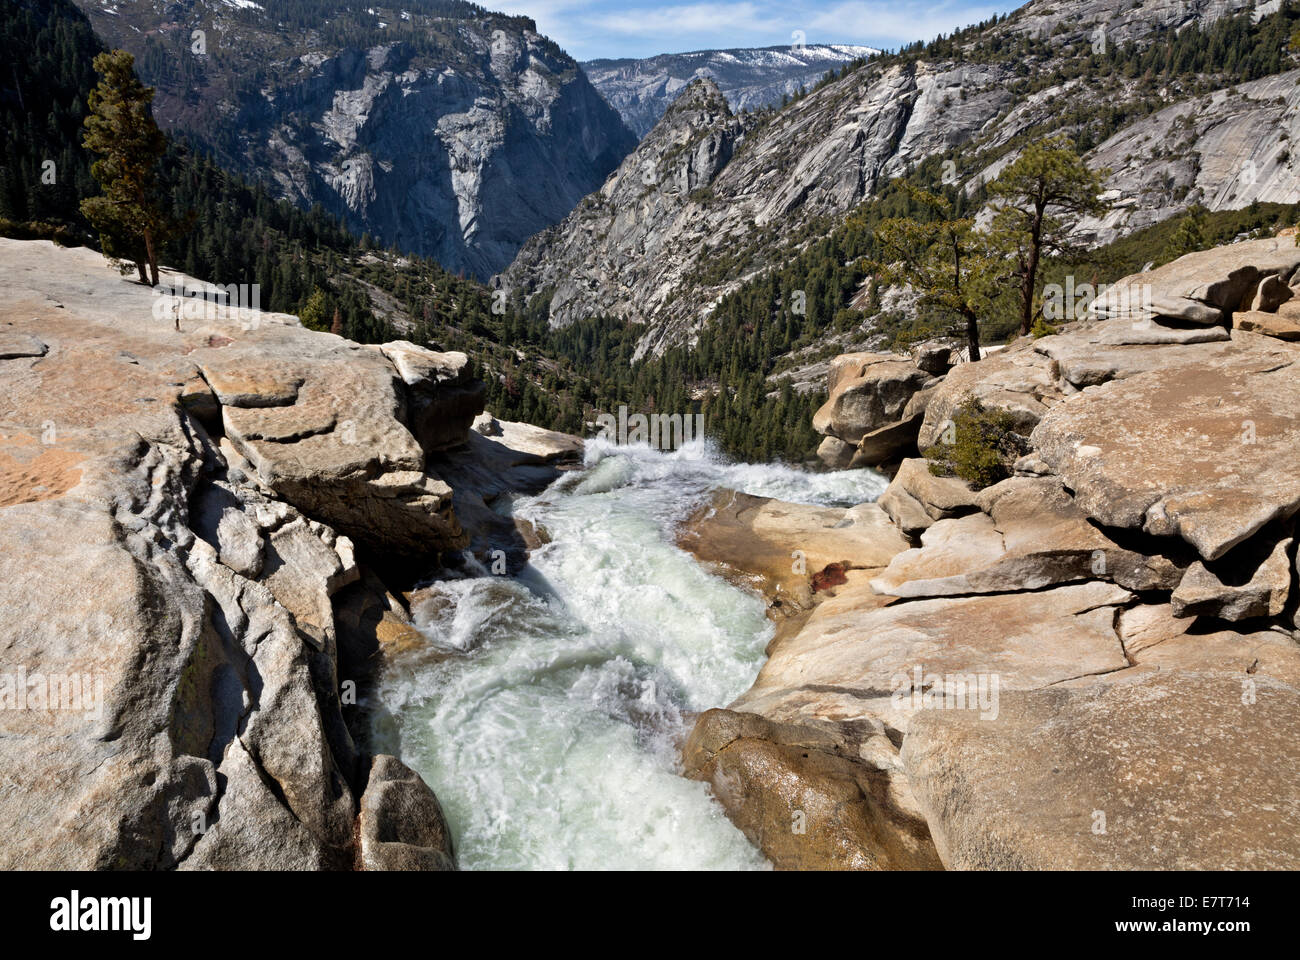 CA02305-00...CALIFORNIA - The Merced River at the top of Nevada Fall in Yosemite National Park. Stock Photo